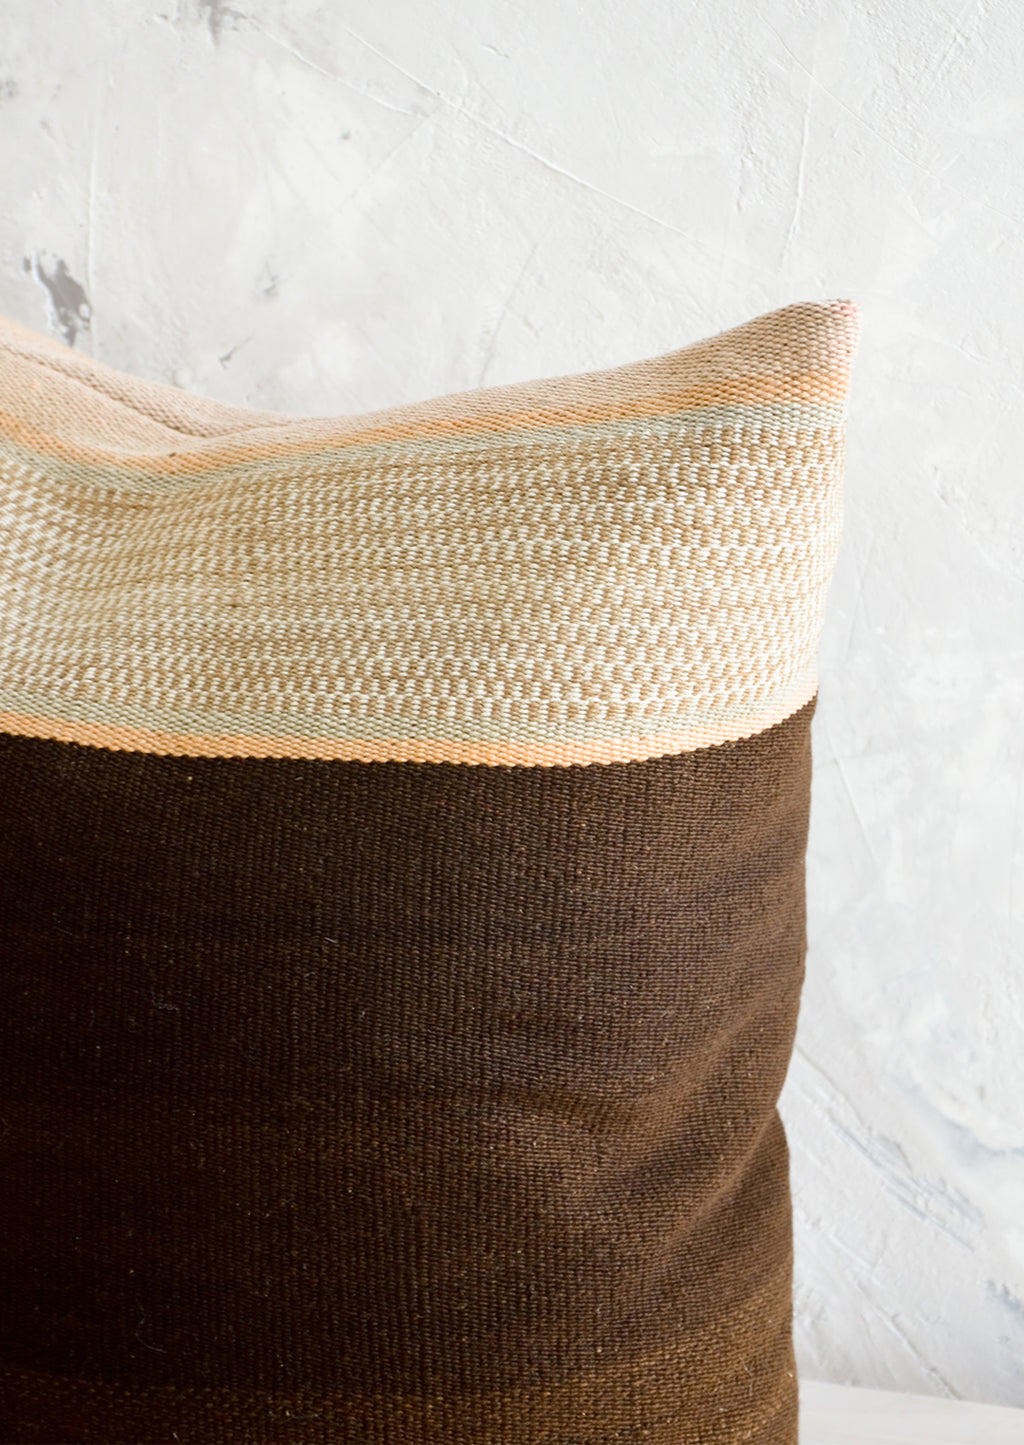 2: Throw pillow made from vintage wool fabric in brown and beige